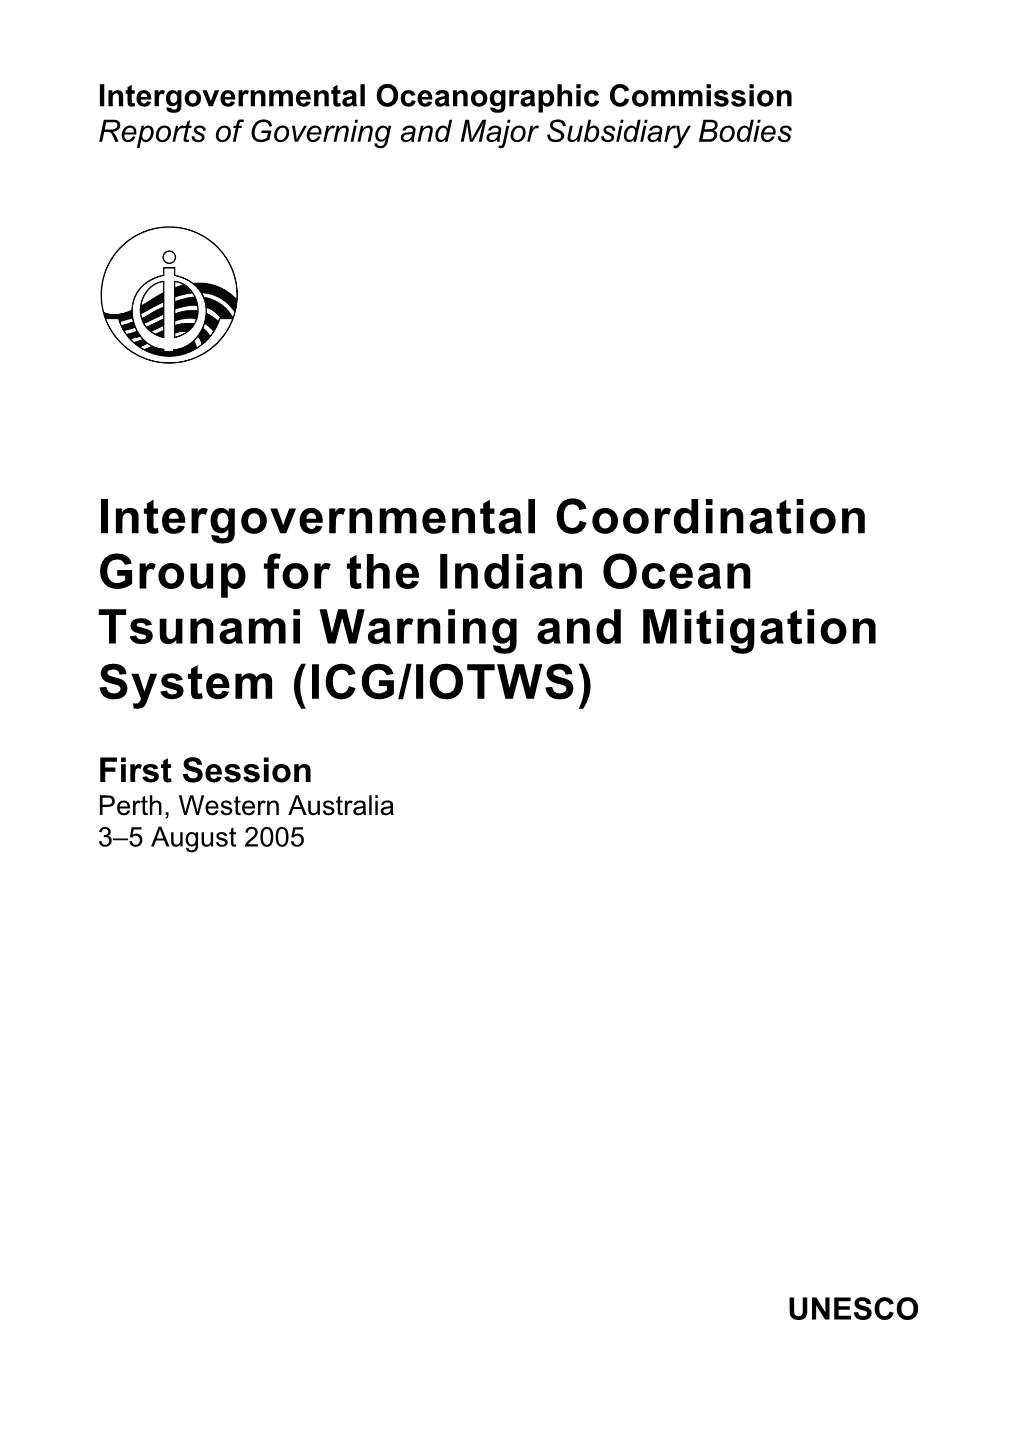 Intergovernmental Coordination Group for the Indian Ocean Tsunami Warning and Mitigation System (ICG/IOTWS)